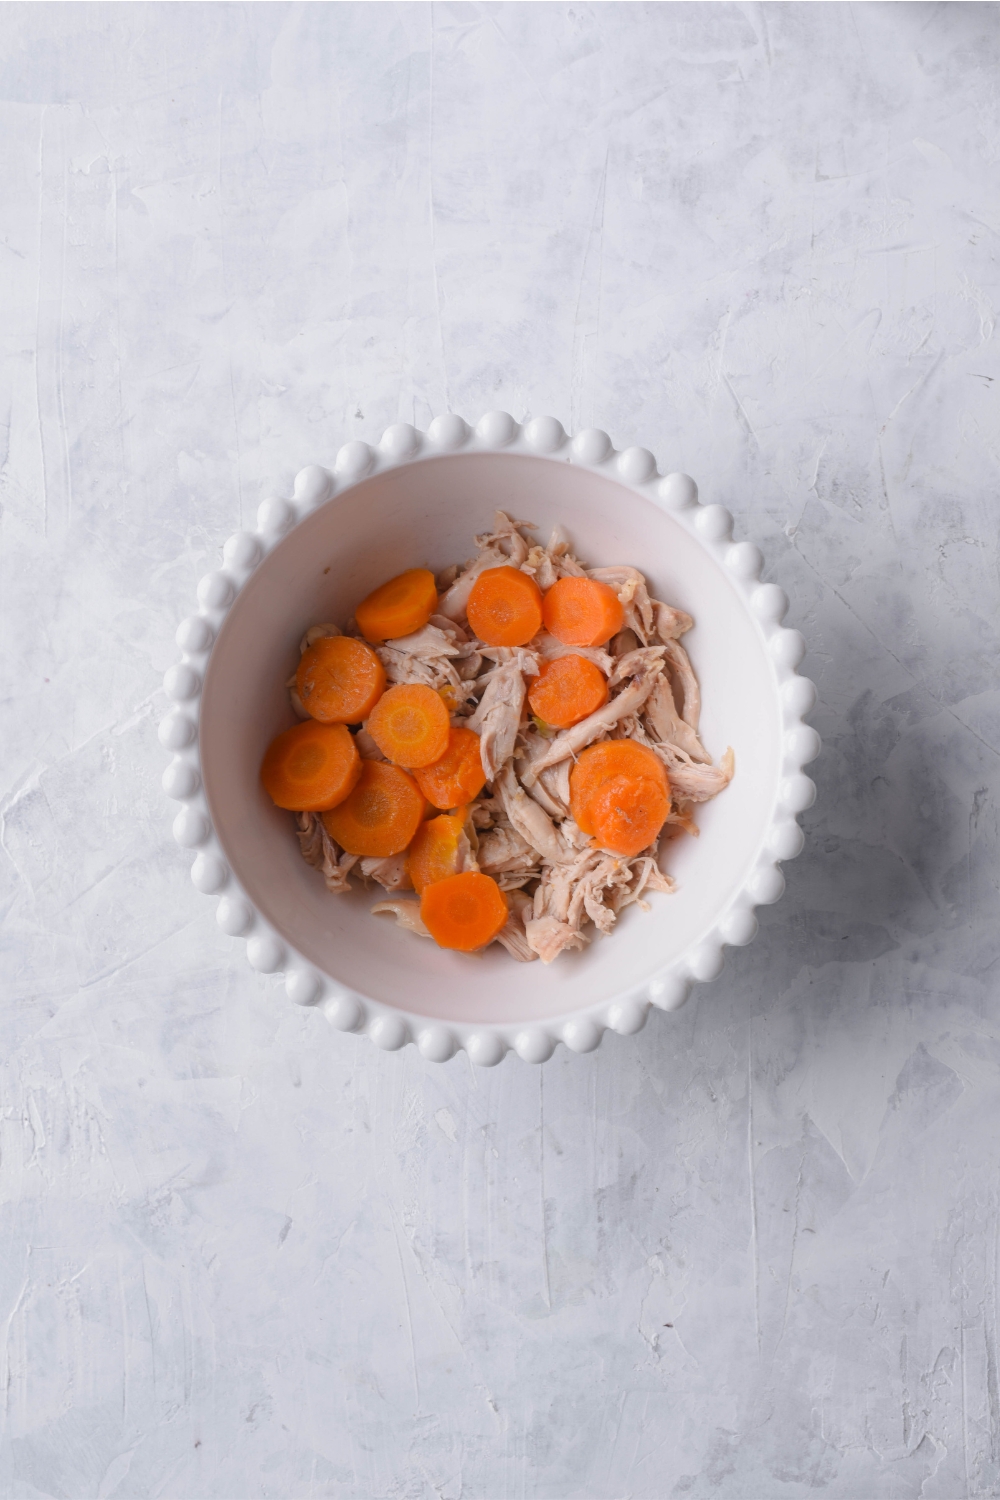 A white bowl filled with shredded chicken and cooked carrots.